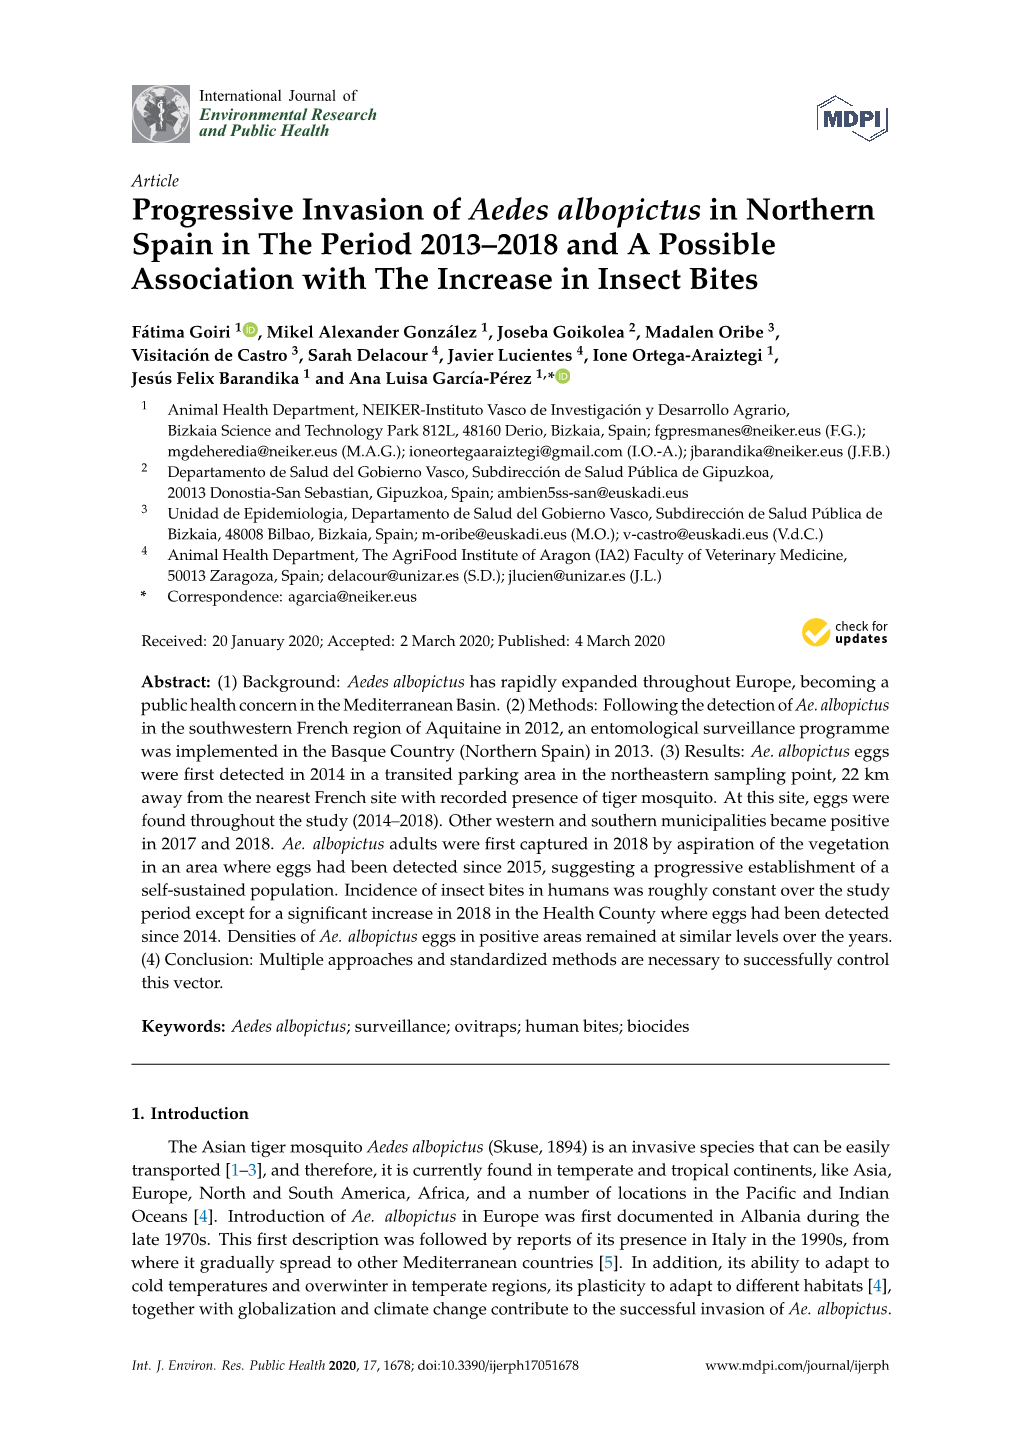 Progressive Invasion of Aedes Albopictus in Northern Spain in the Period 2013–2018 and a Possible Association with the Increase in Insect Bites